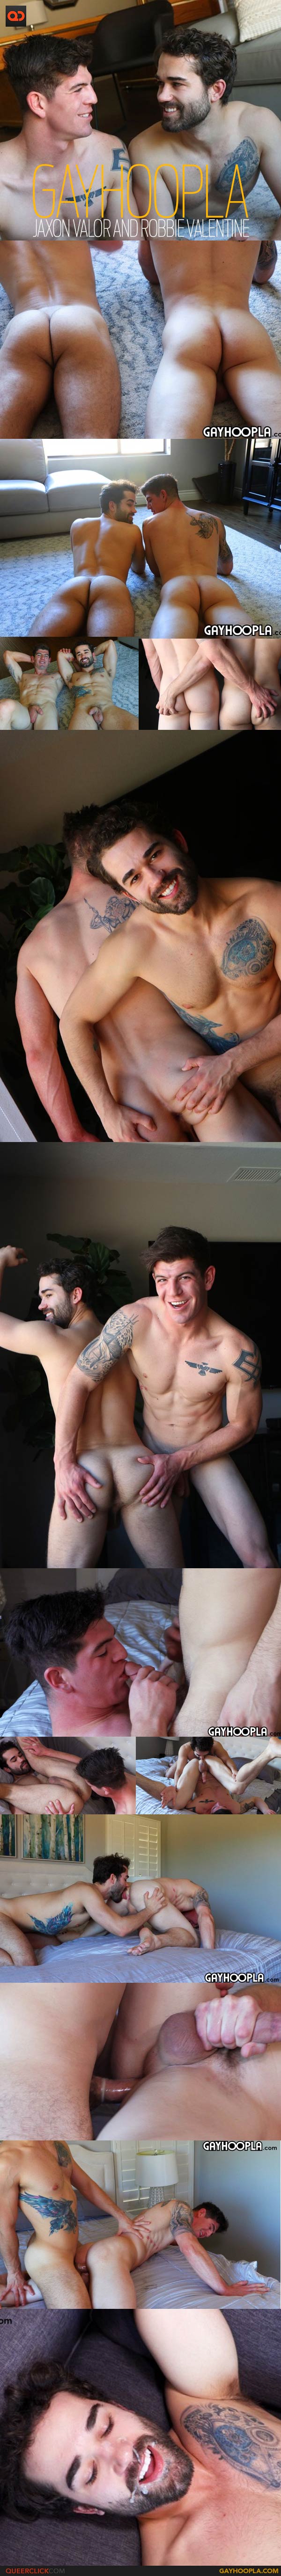 GayHoopla: Jaxon Valor and Robbie Valentine - A Fuck for the AGES!